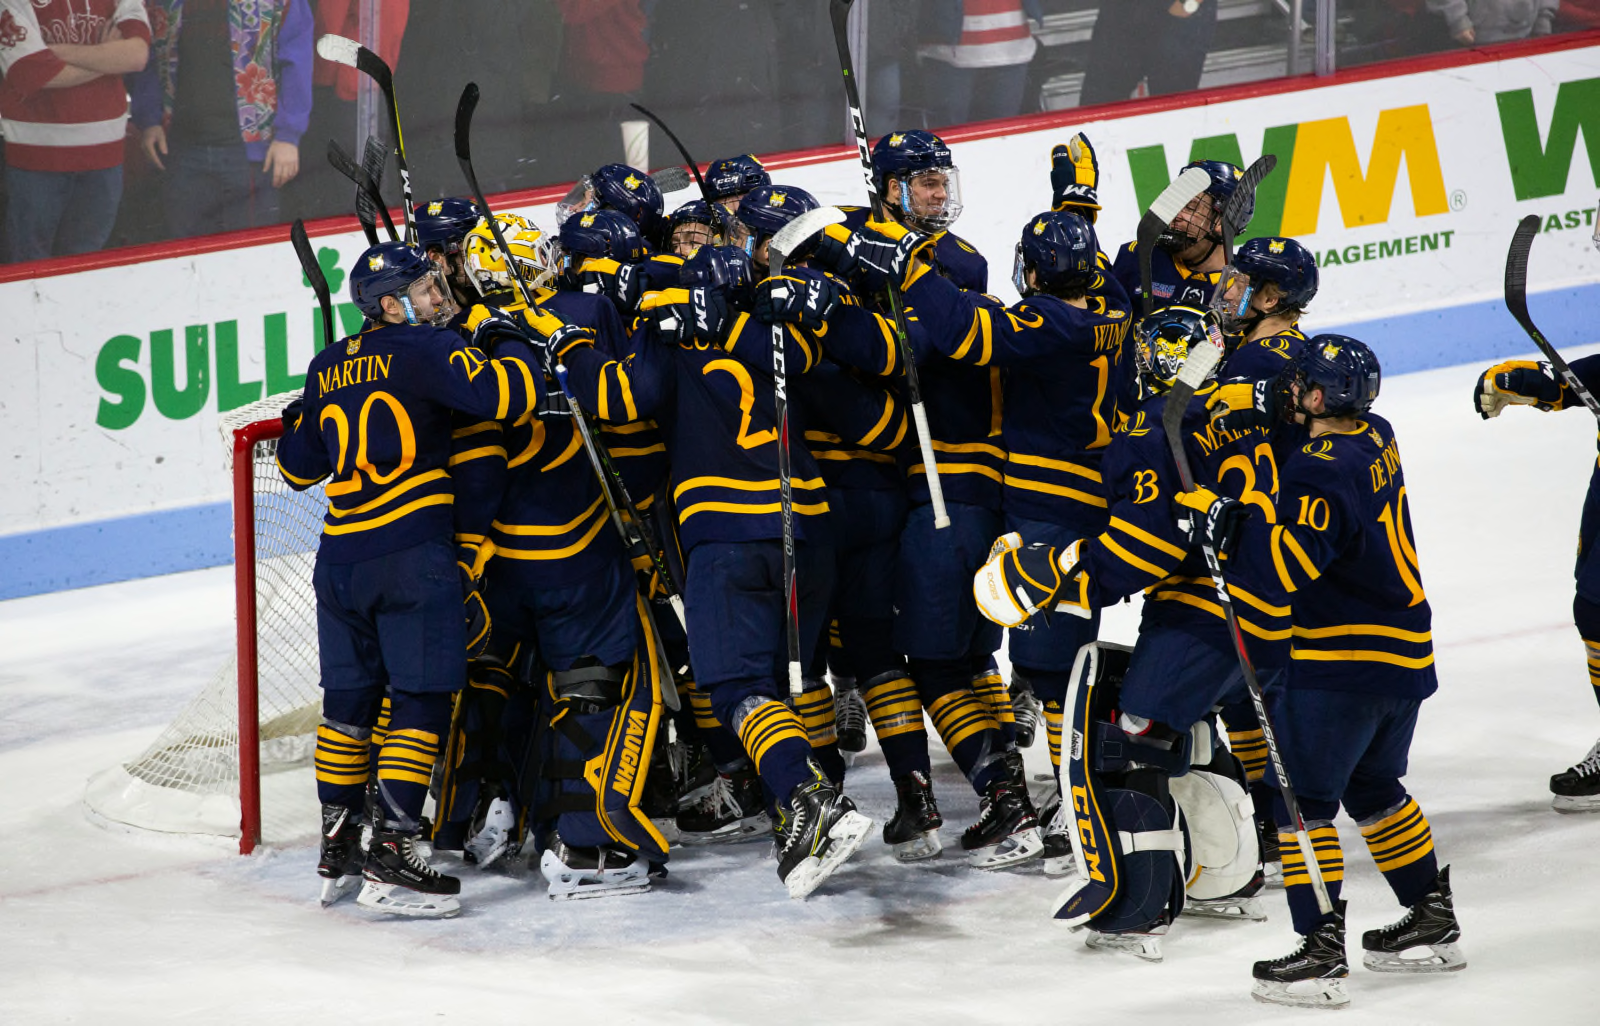 NCAA Hockey: Ranking Contenders and Pretenders entering tournaments